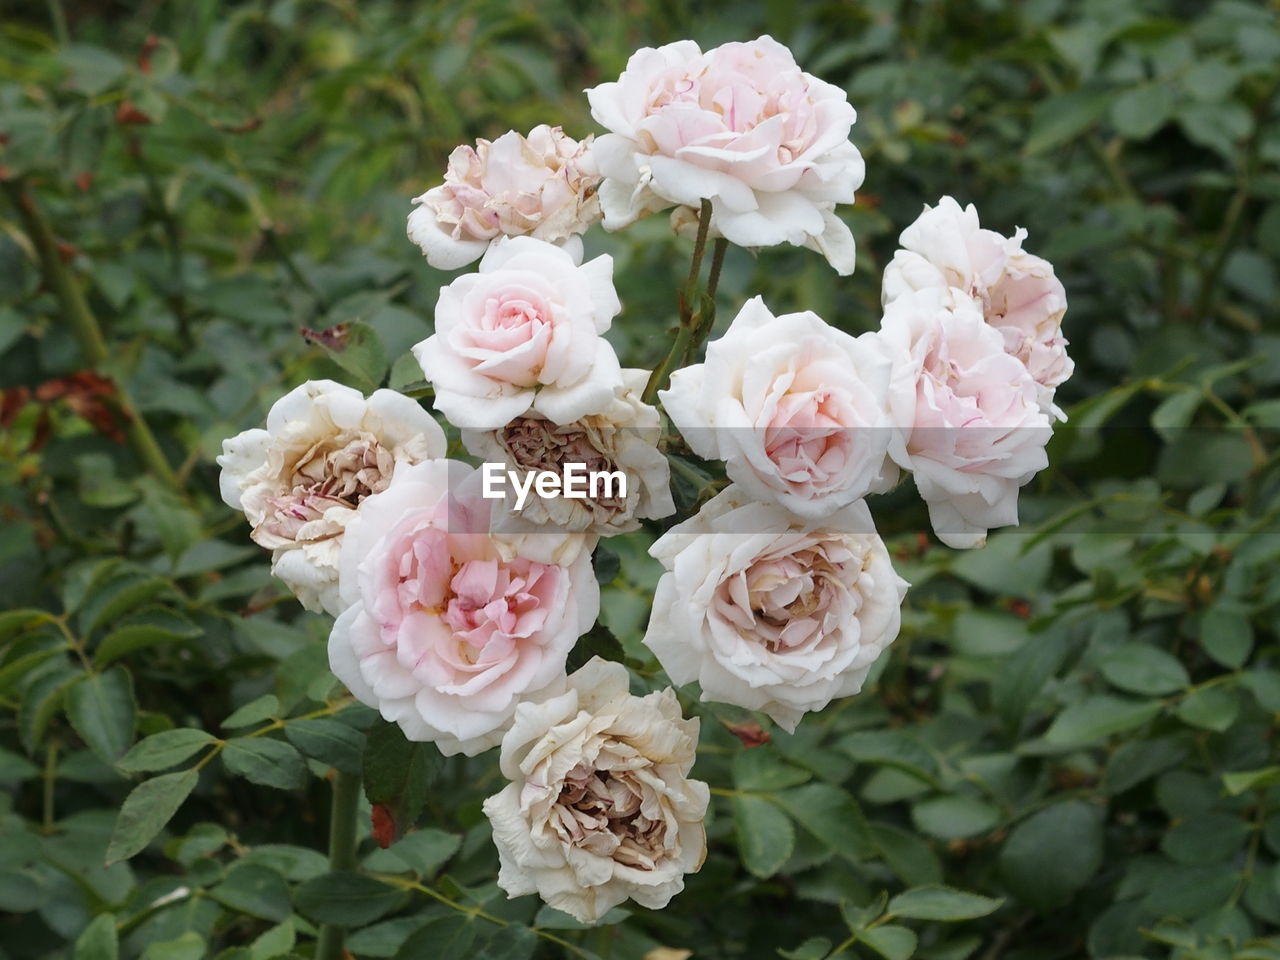 Close-up of roses blooming in garden